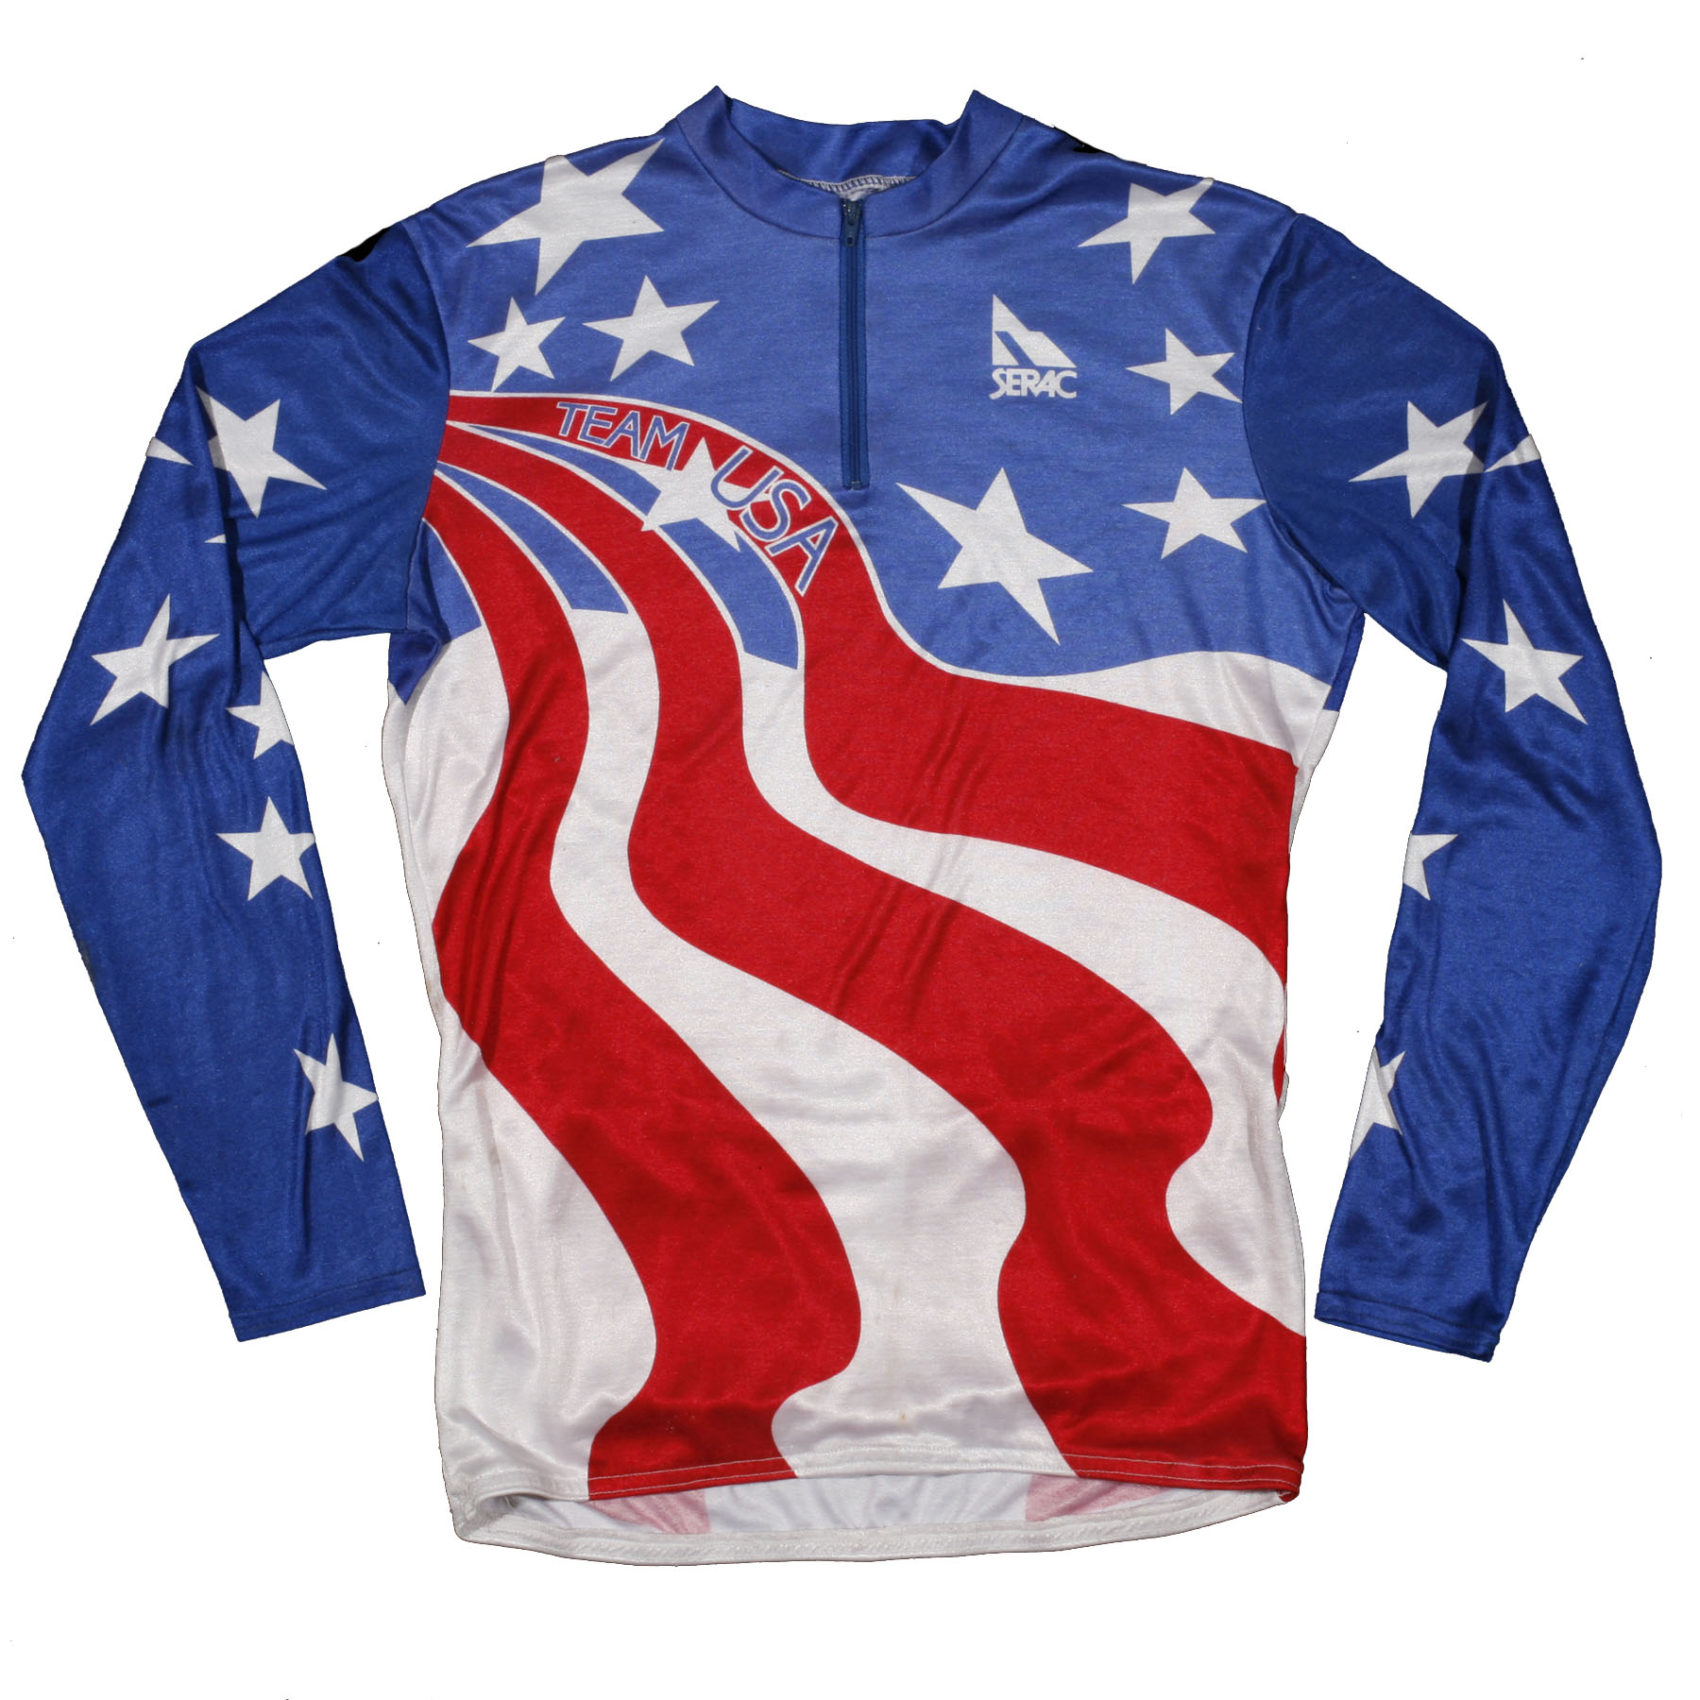 US National Champion Jersey, Race Worn - Horton Collection